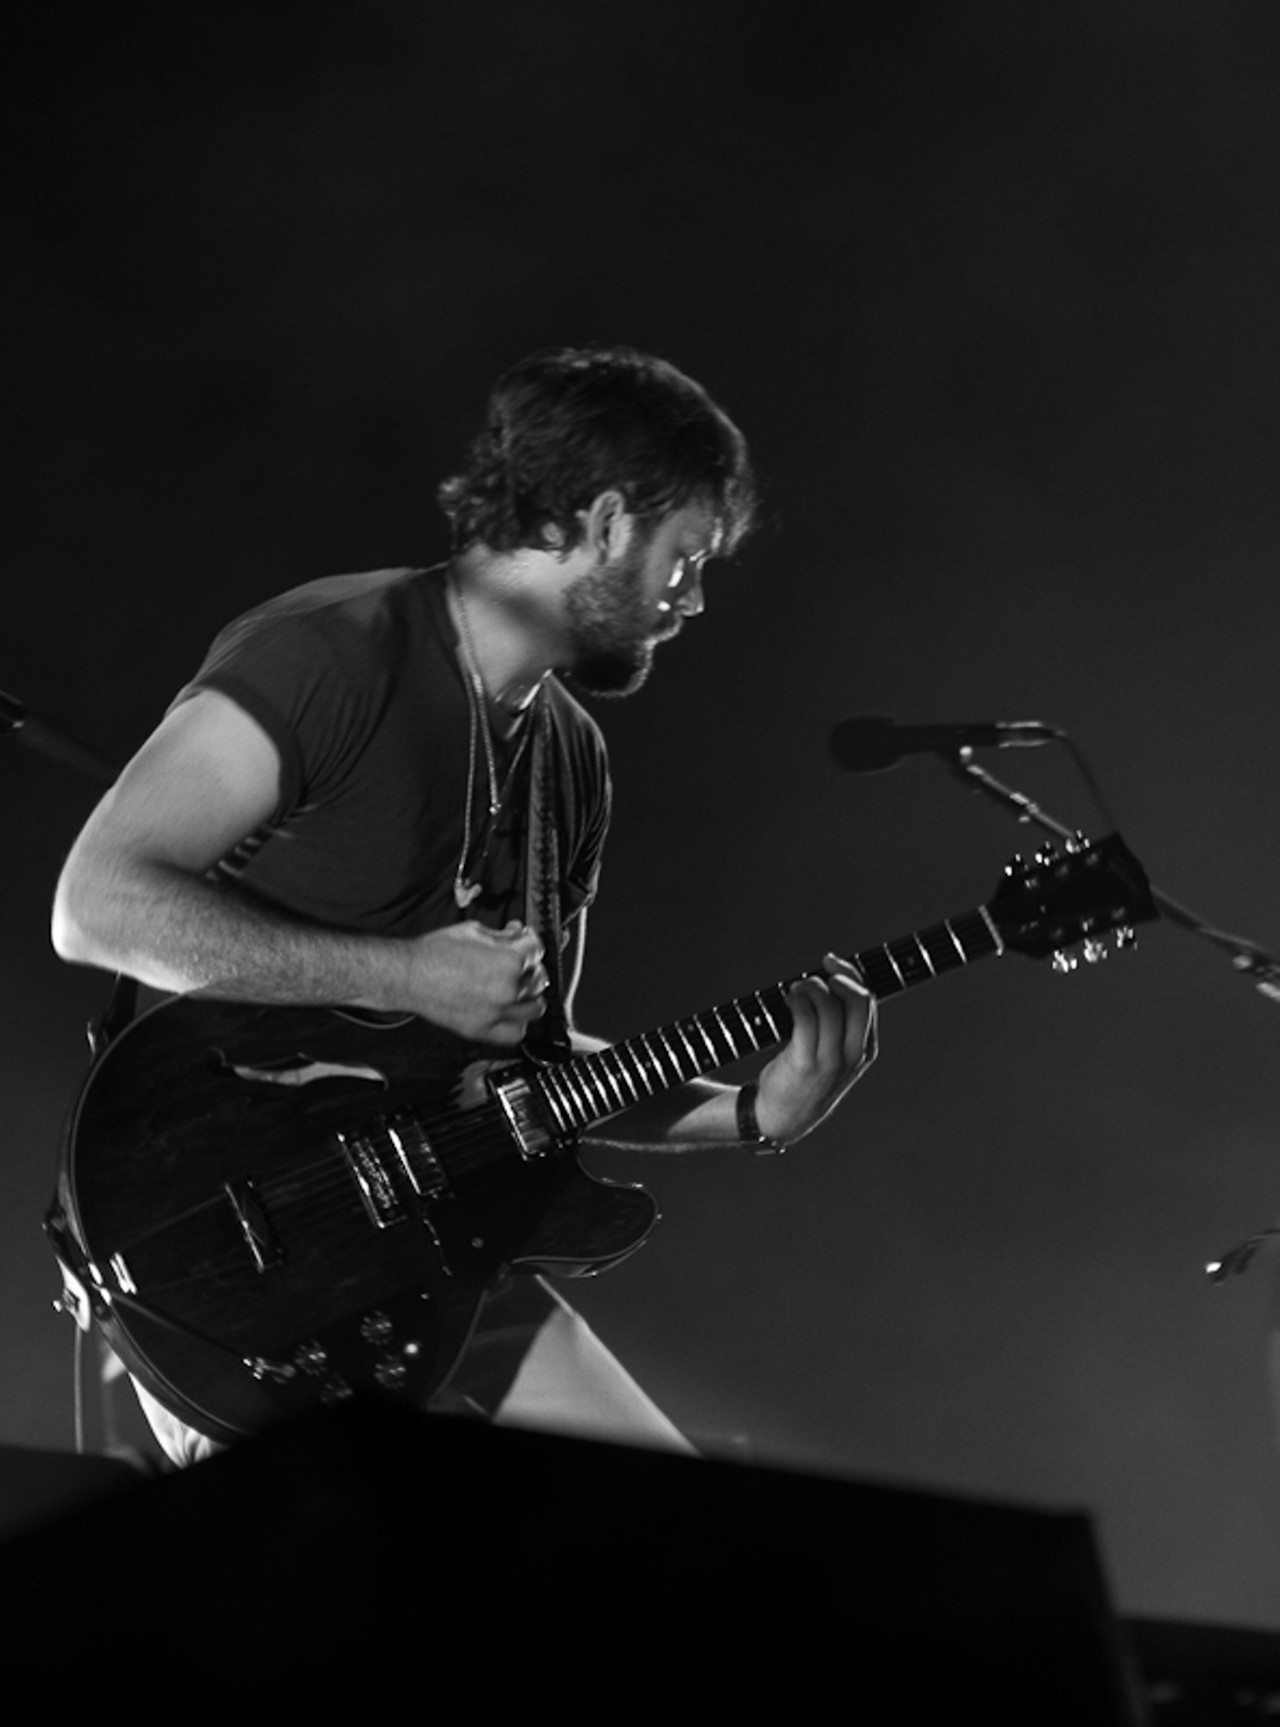 Kings of Leon performing in St. Louis at the Verizon Wireless Amphitheater.